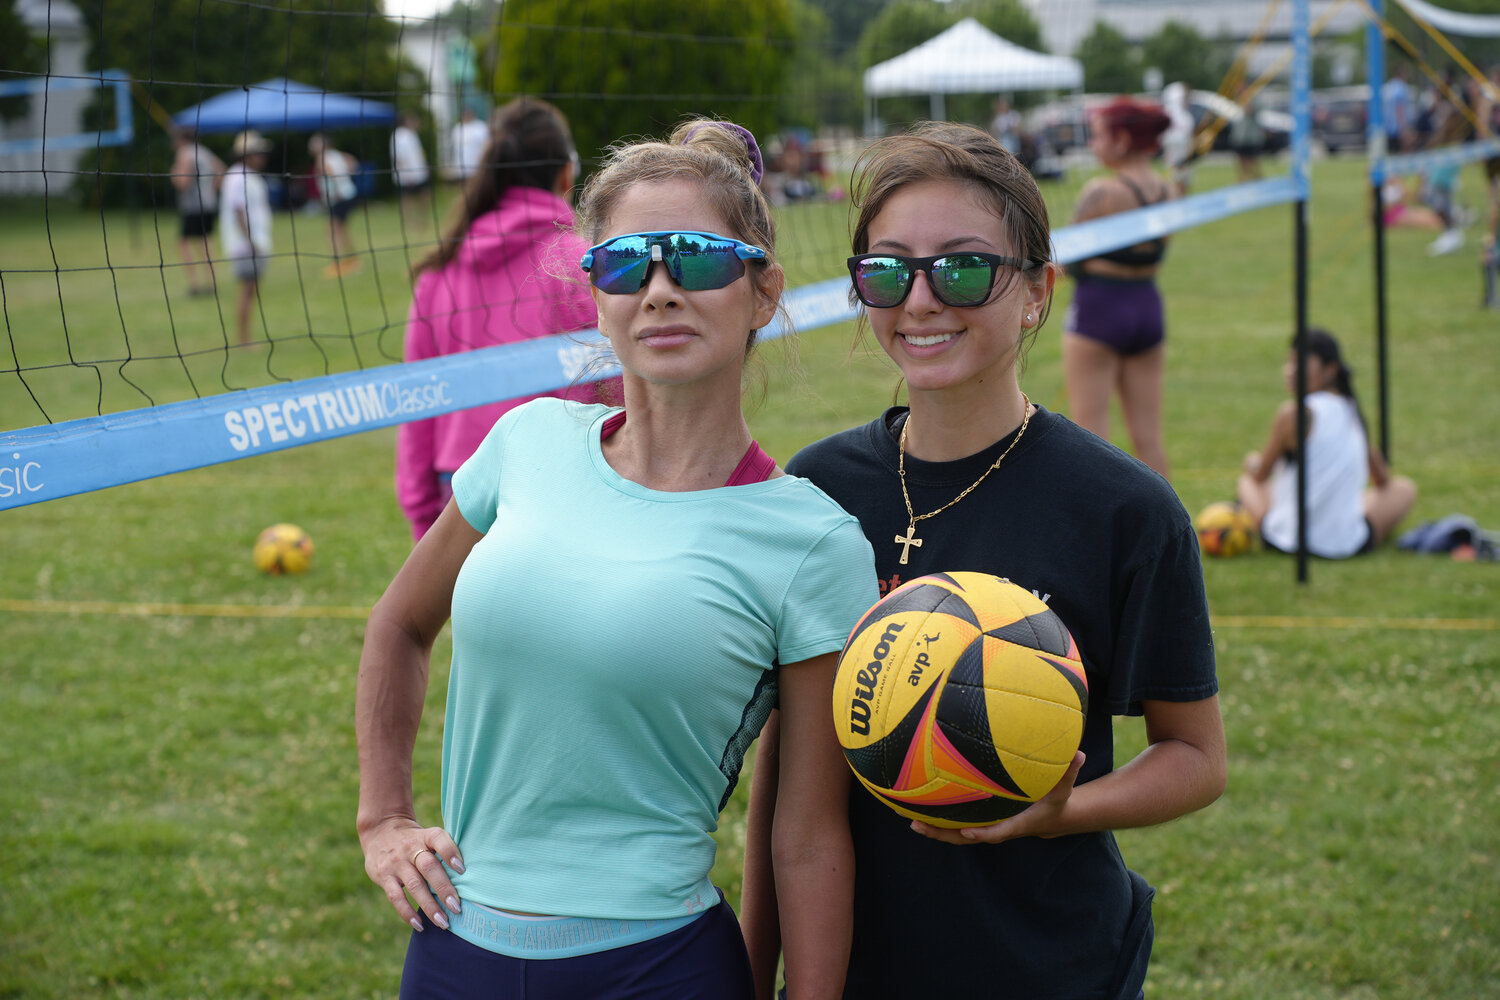 Desiree Bordone, left, and Sabrina Bordone from Massapequa Park joined the tournament to show their support.